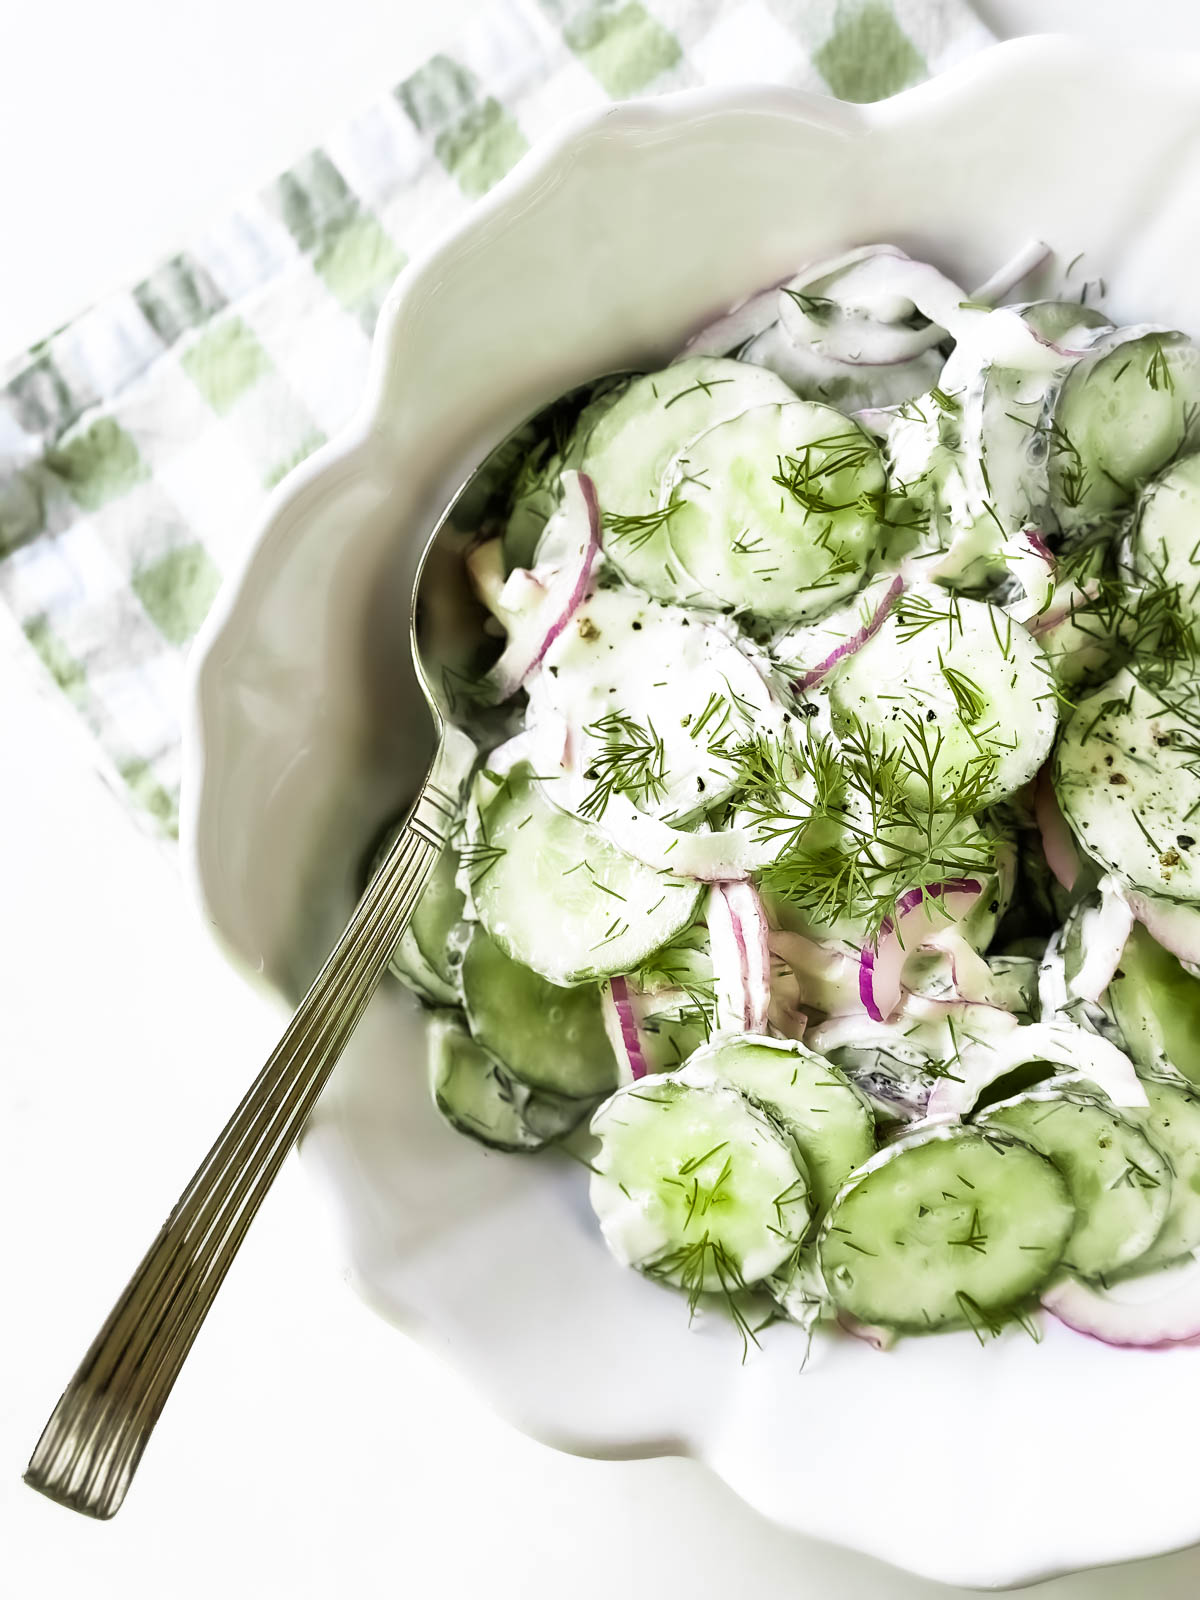 Cucumber salad with red onion and dill in a white bowl.